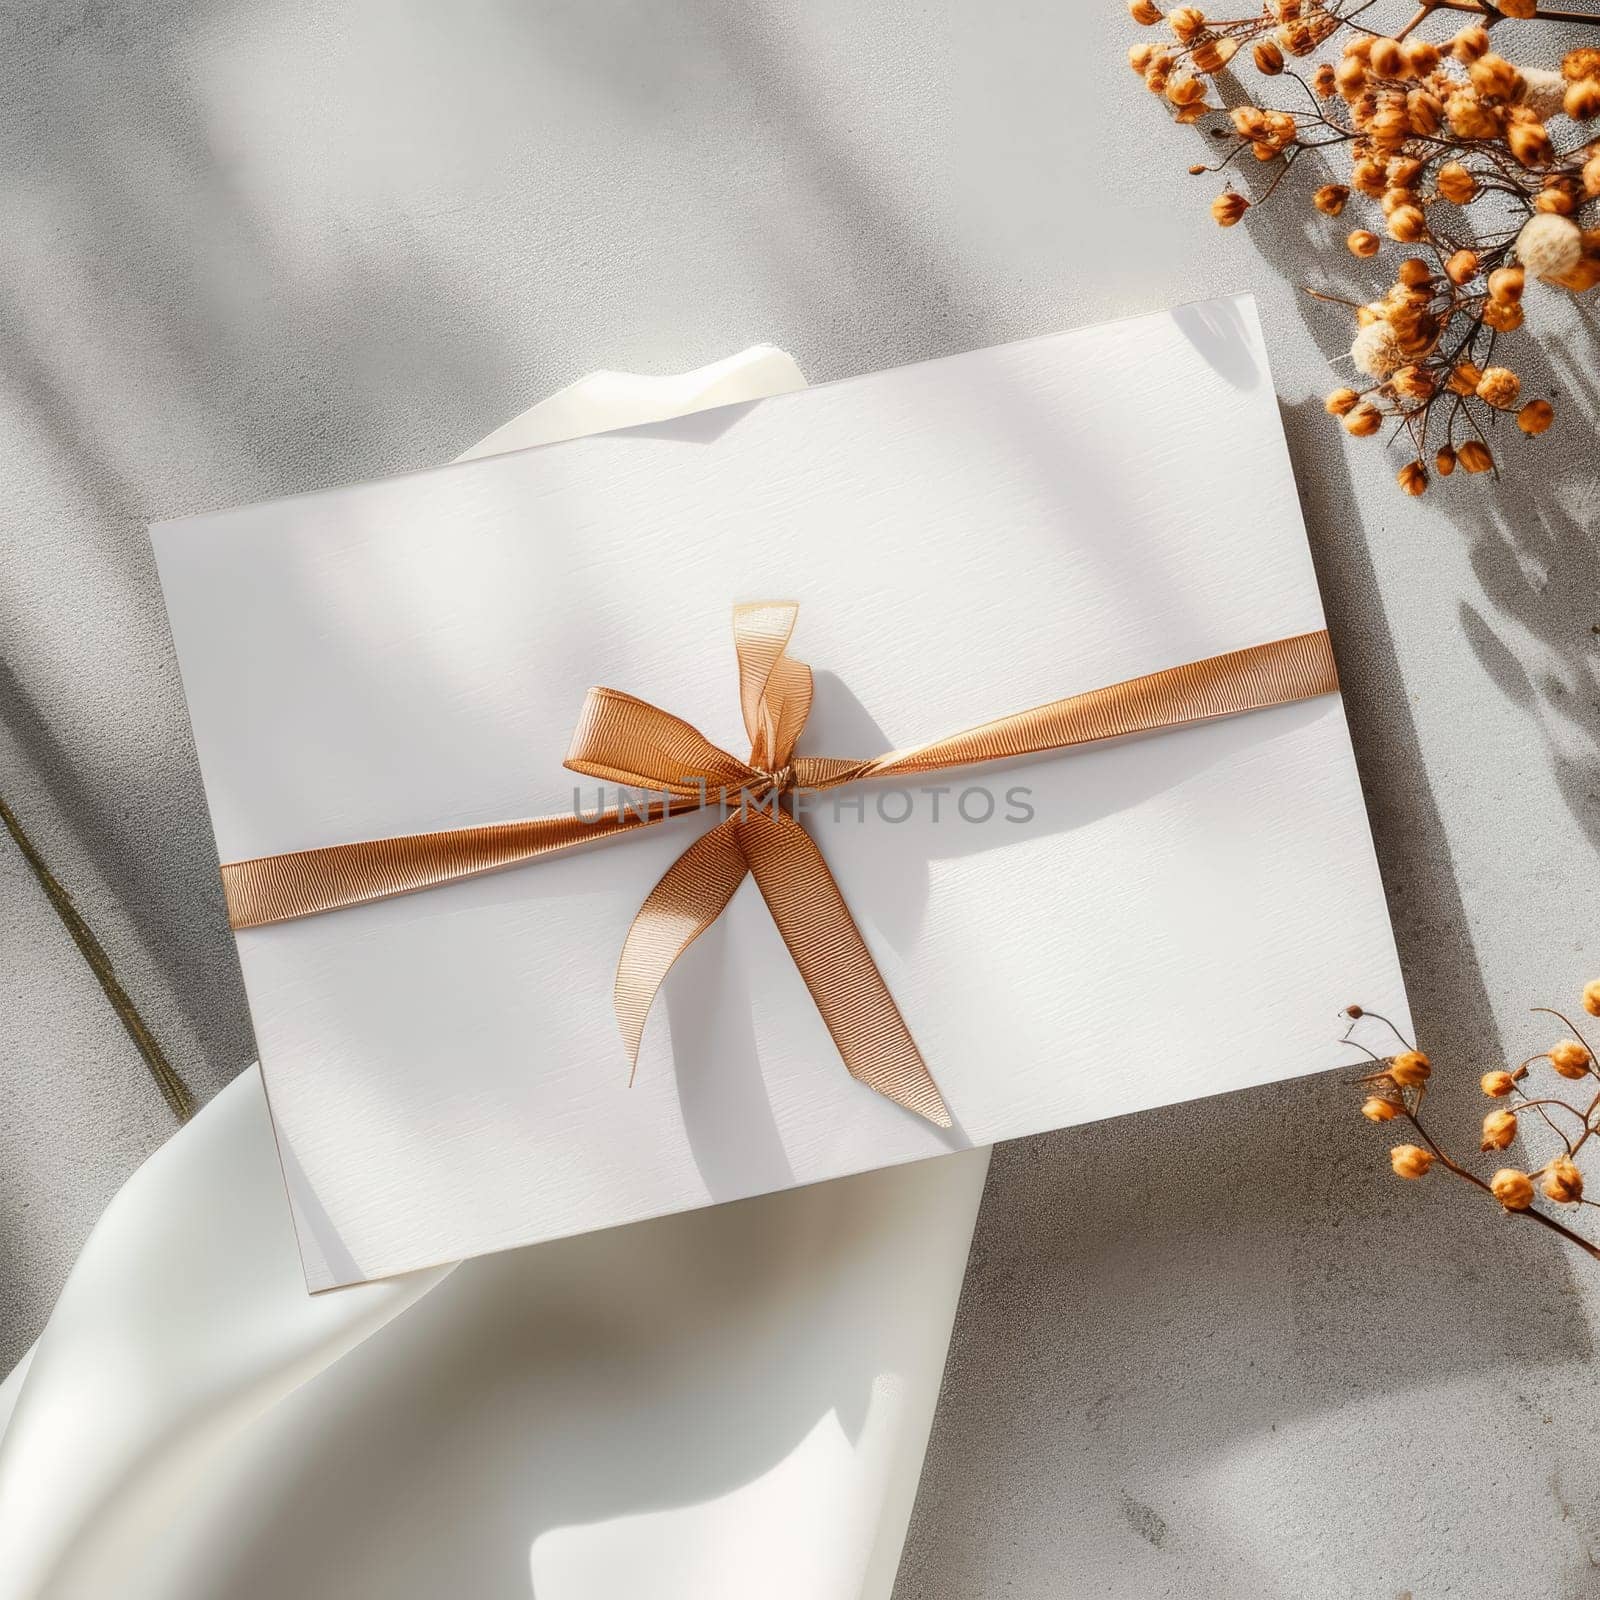 A sunlit white envelope, embellished with a satin golden ribbon, casts a soft shadow amidst dried autumnal flora. This image embodies the warmth and nostalgia of seasonal correspondence.